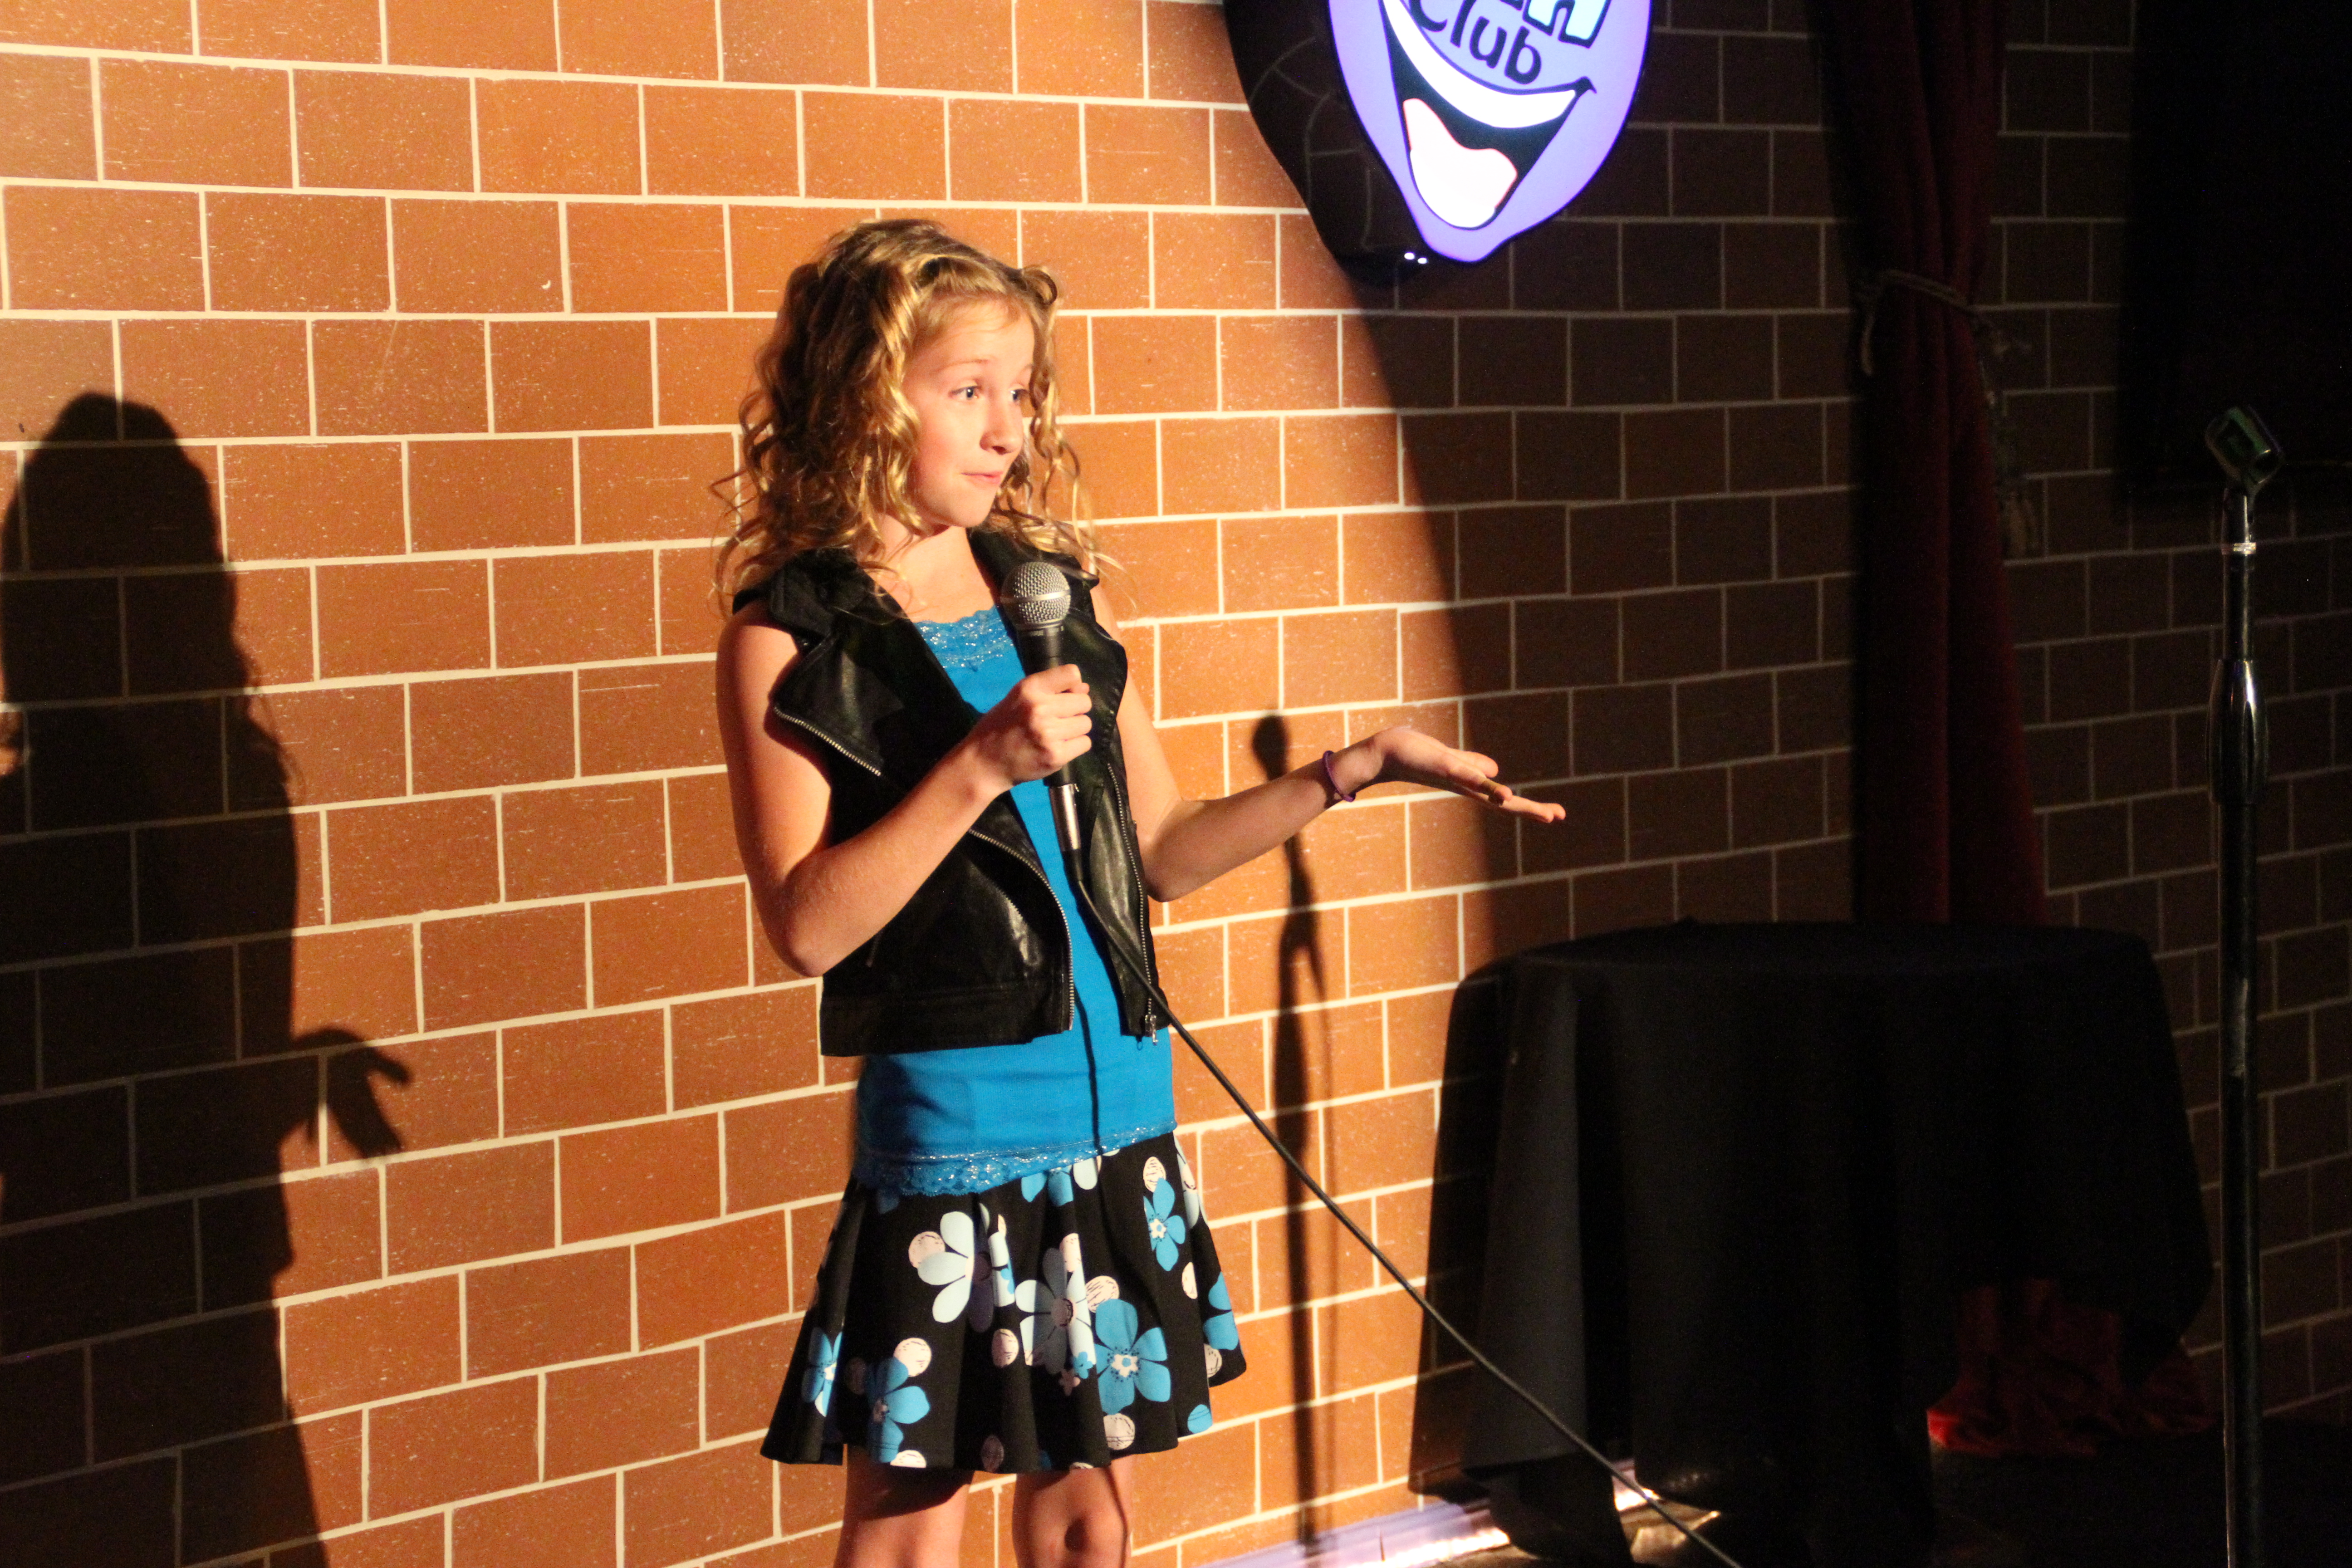 Jolie performing stand up comedy at the HaHa Cafe in North Hollywood